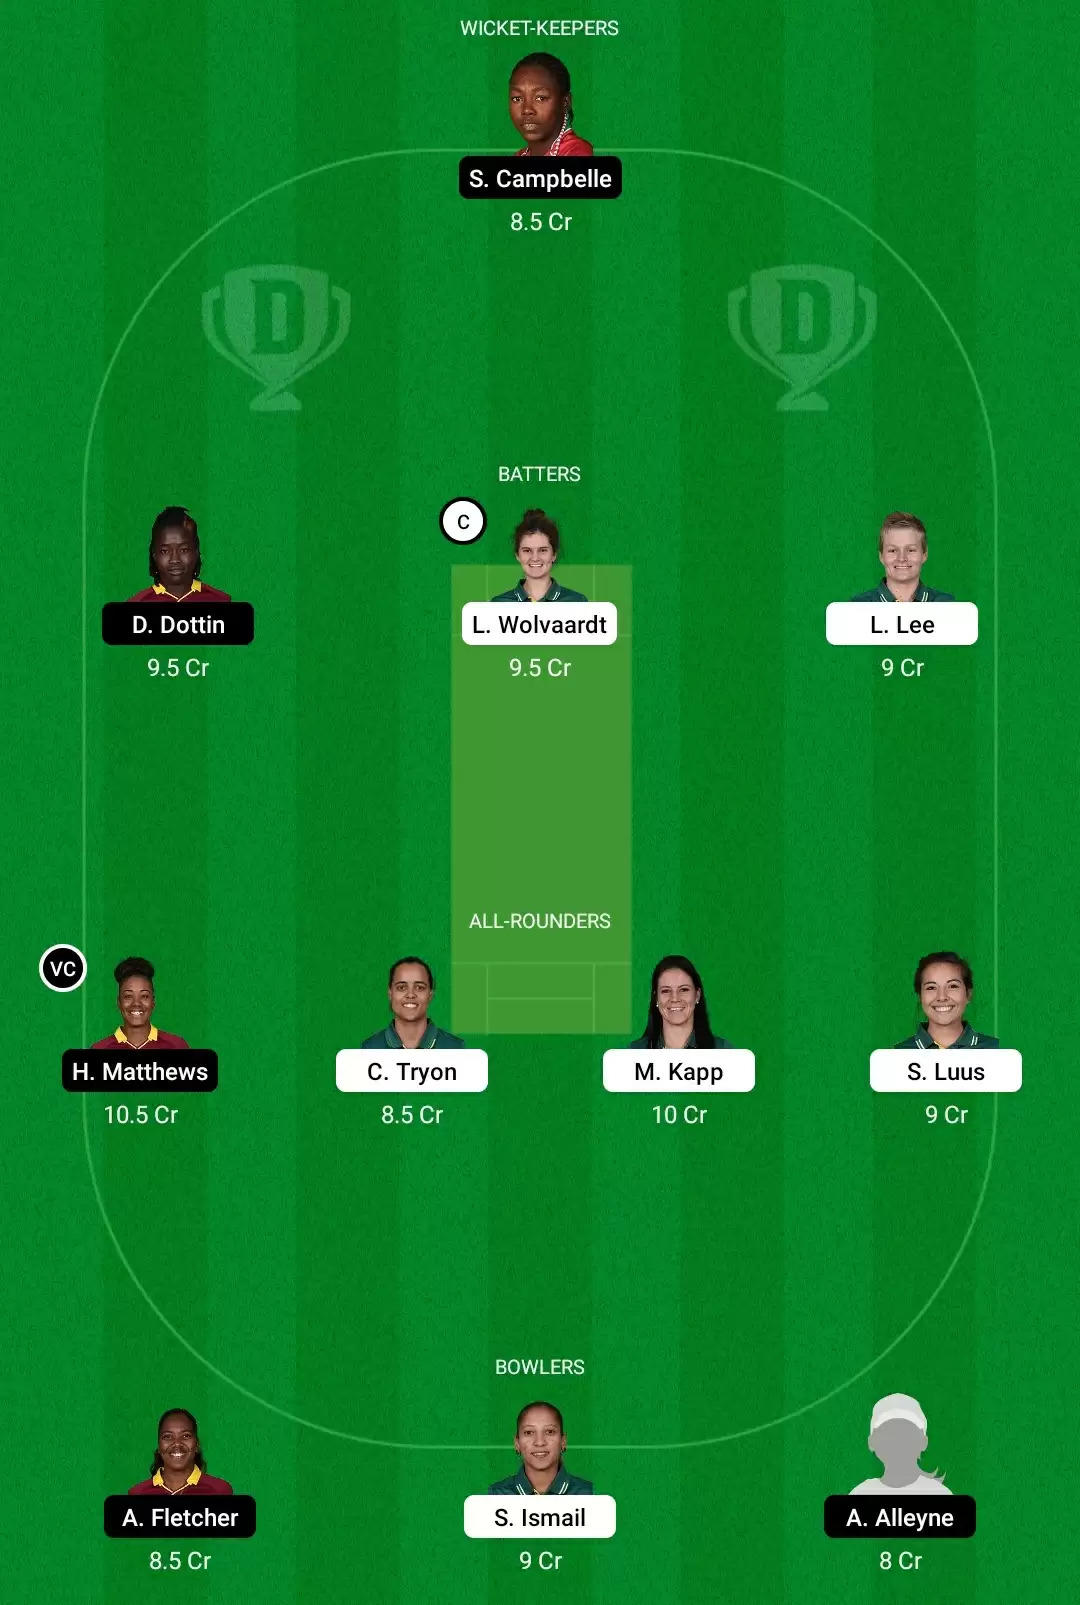 SA-W vs WI-W Dream11 Prediction, Fantasy Cricket Tips, Playing XI, Dream11 Team, Pitch And Weather Report – South Africa Women Vs West Indies Women Match, ICC Women’s World Cup 2022